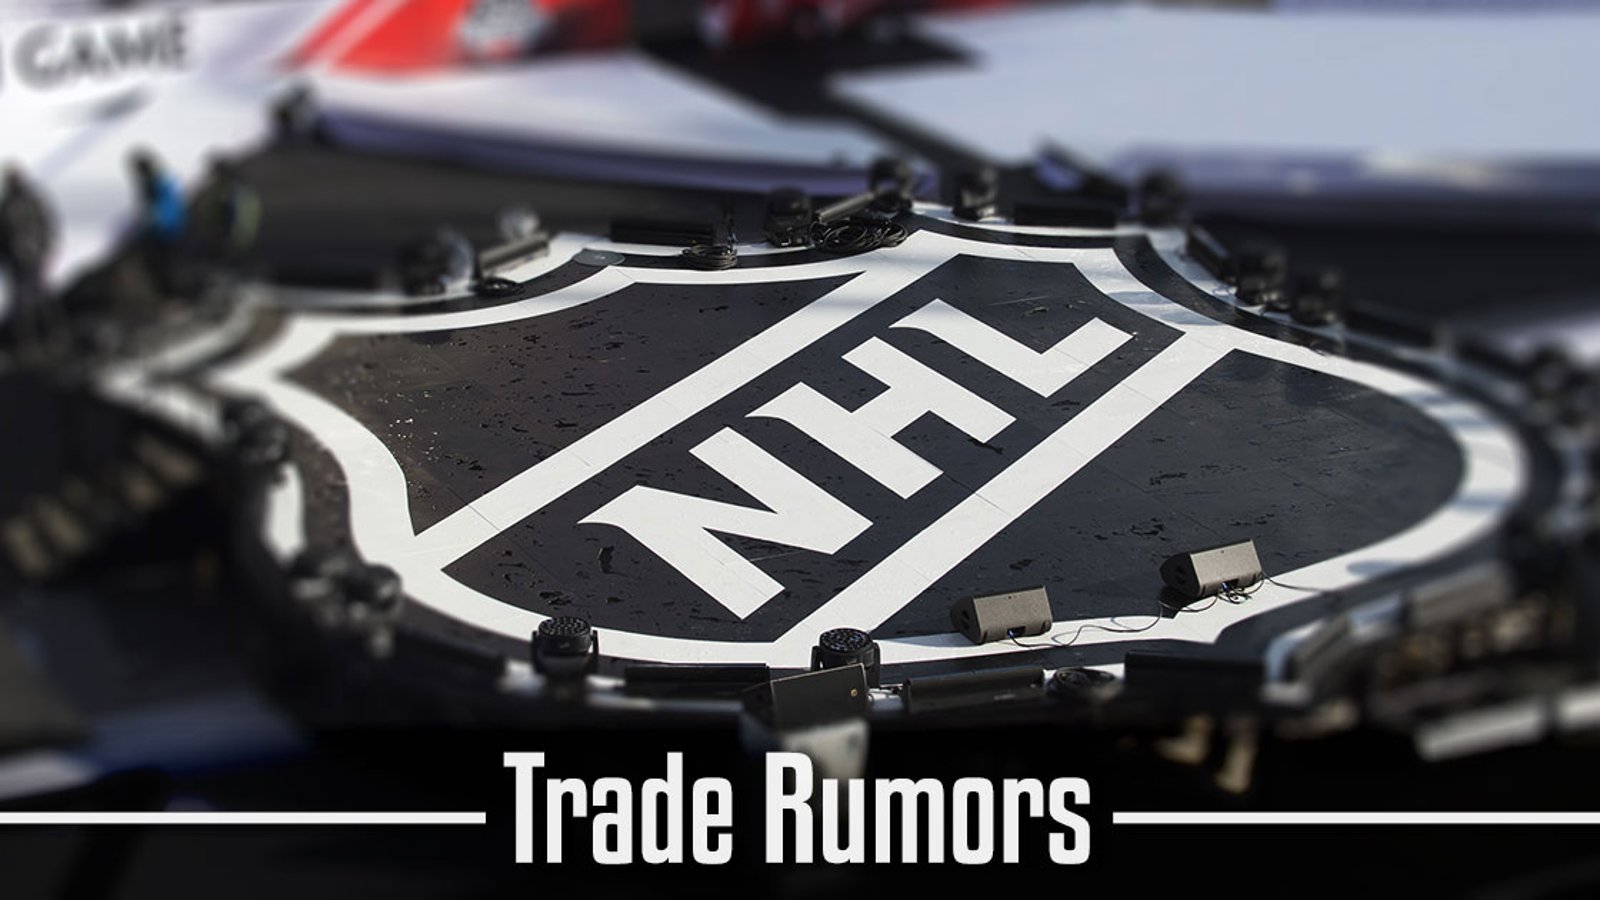 Over 10 teams have made “serious inquiries” on veteran center, he will be traded.